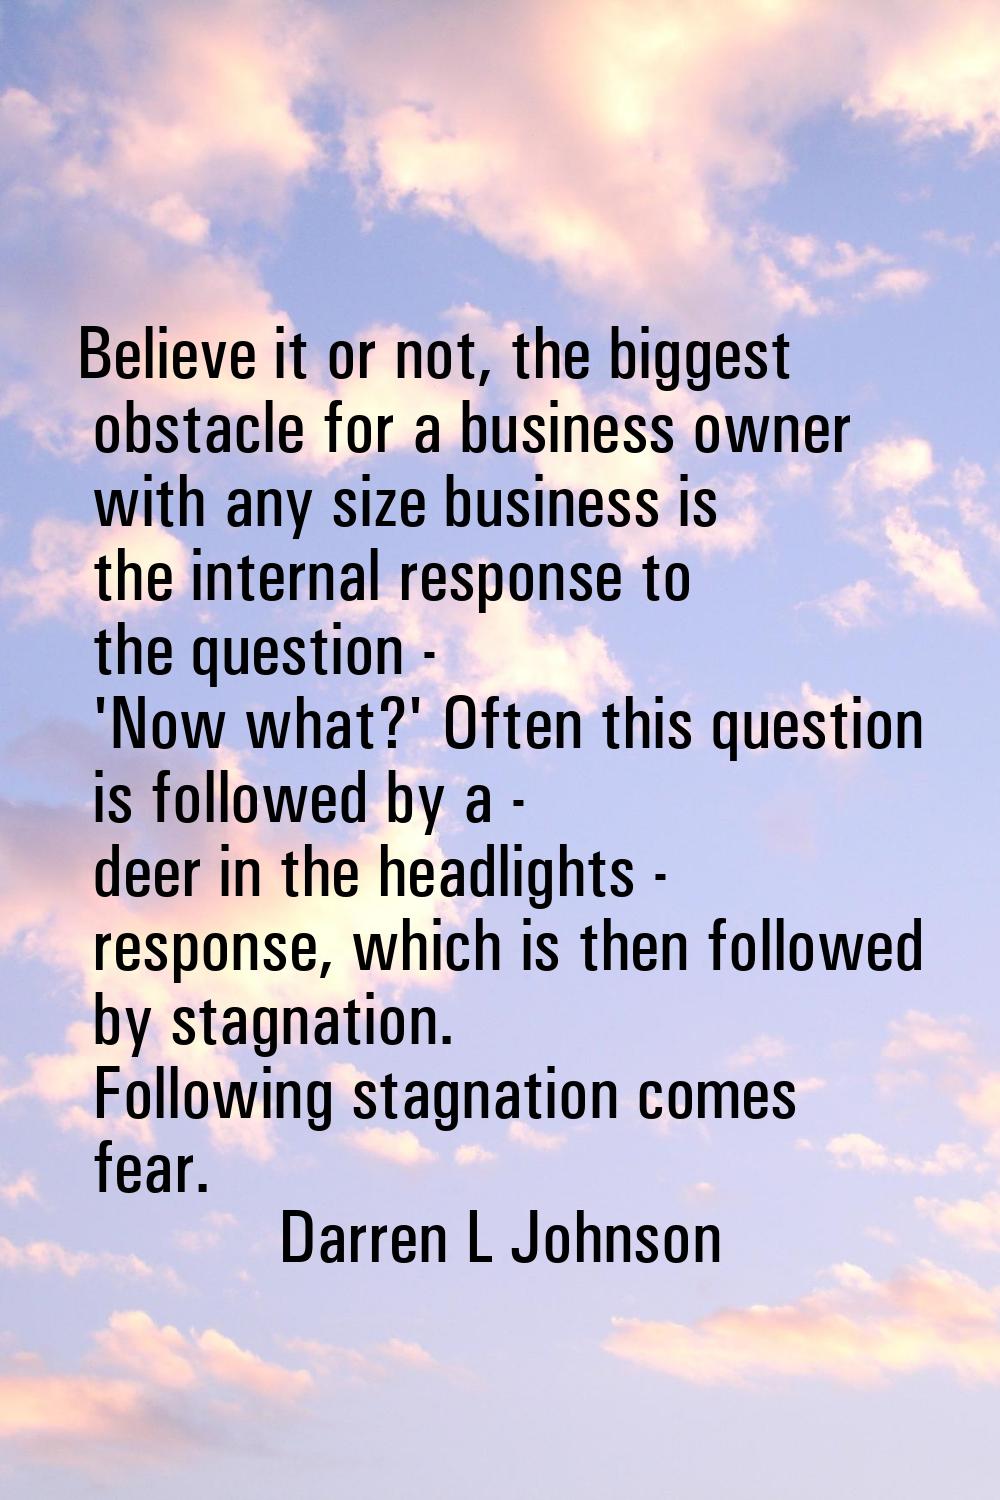 Believe it or not, the biggest obstacle for a business owner with any size business is the internal